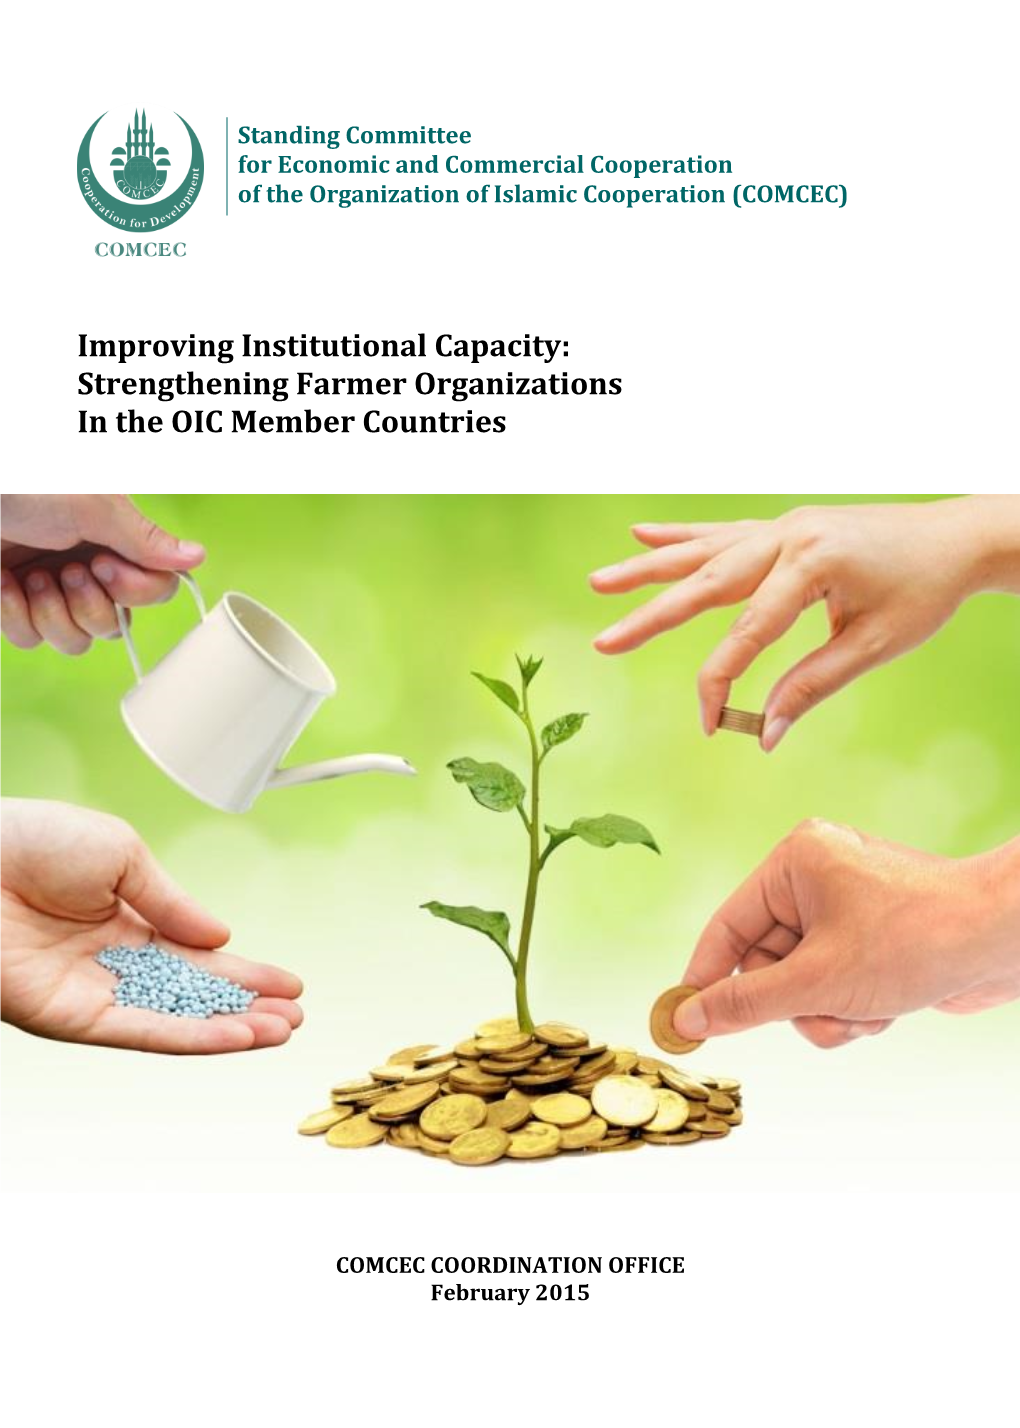 Improving Institutional Capacity: Strengthening Farmer Organizations in the OIC Member Countries